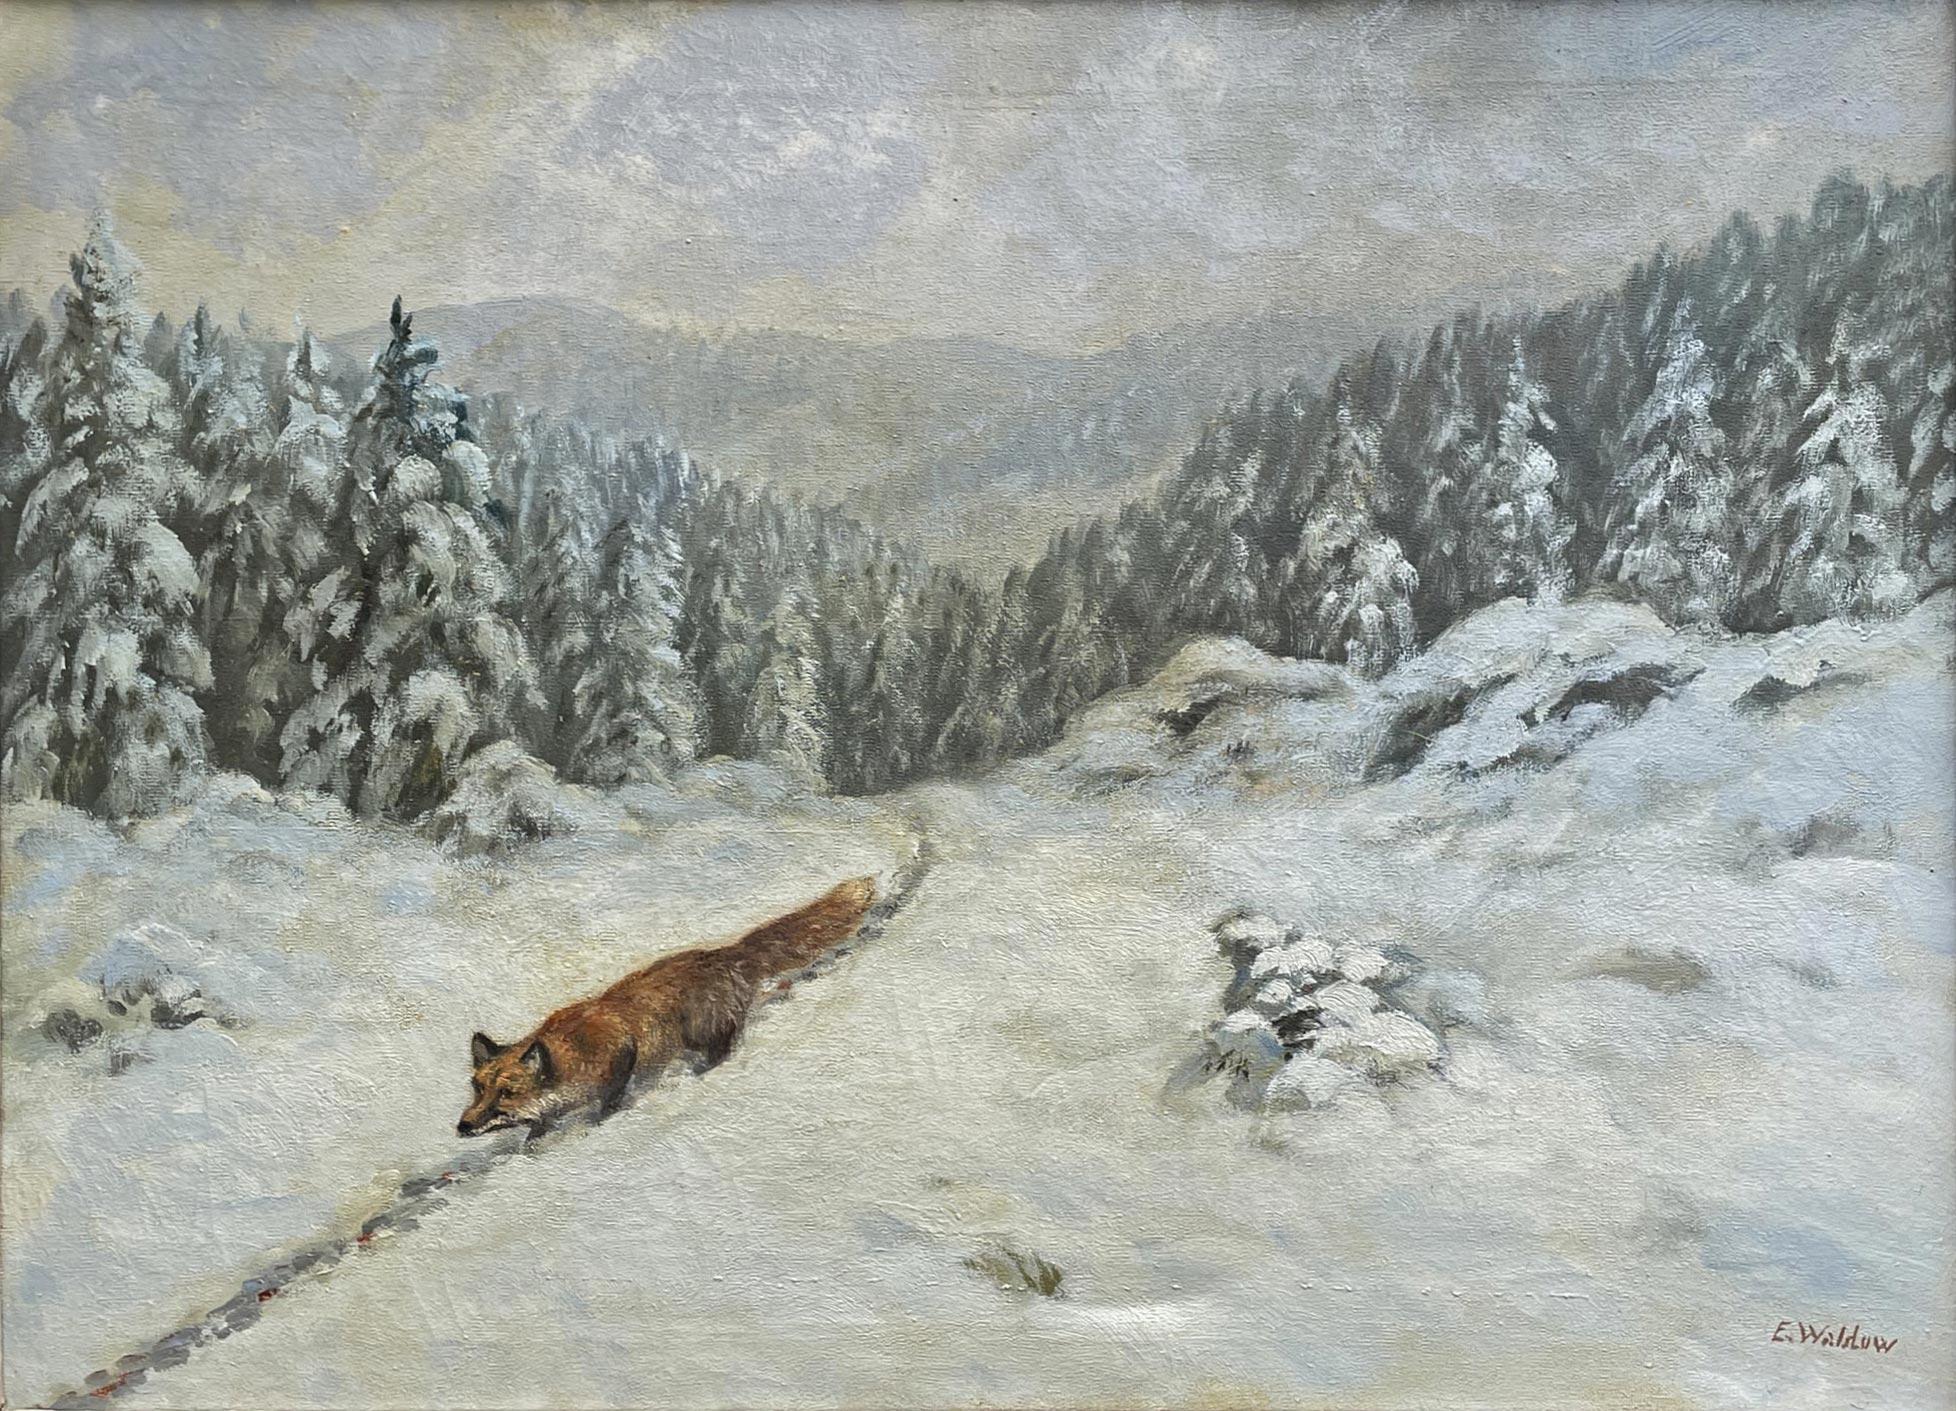 Erwin Waldow - Fox in the Snow

60 x 80 cm - canvas without frame
70 x 90 cm - frame included
Oil painting on canvas, signed lower right.
1920s era.